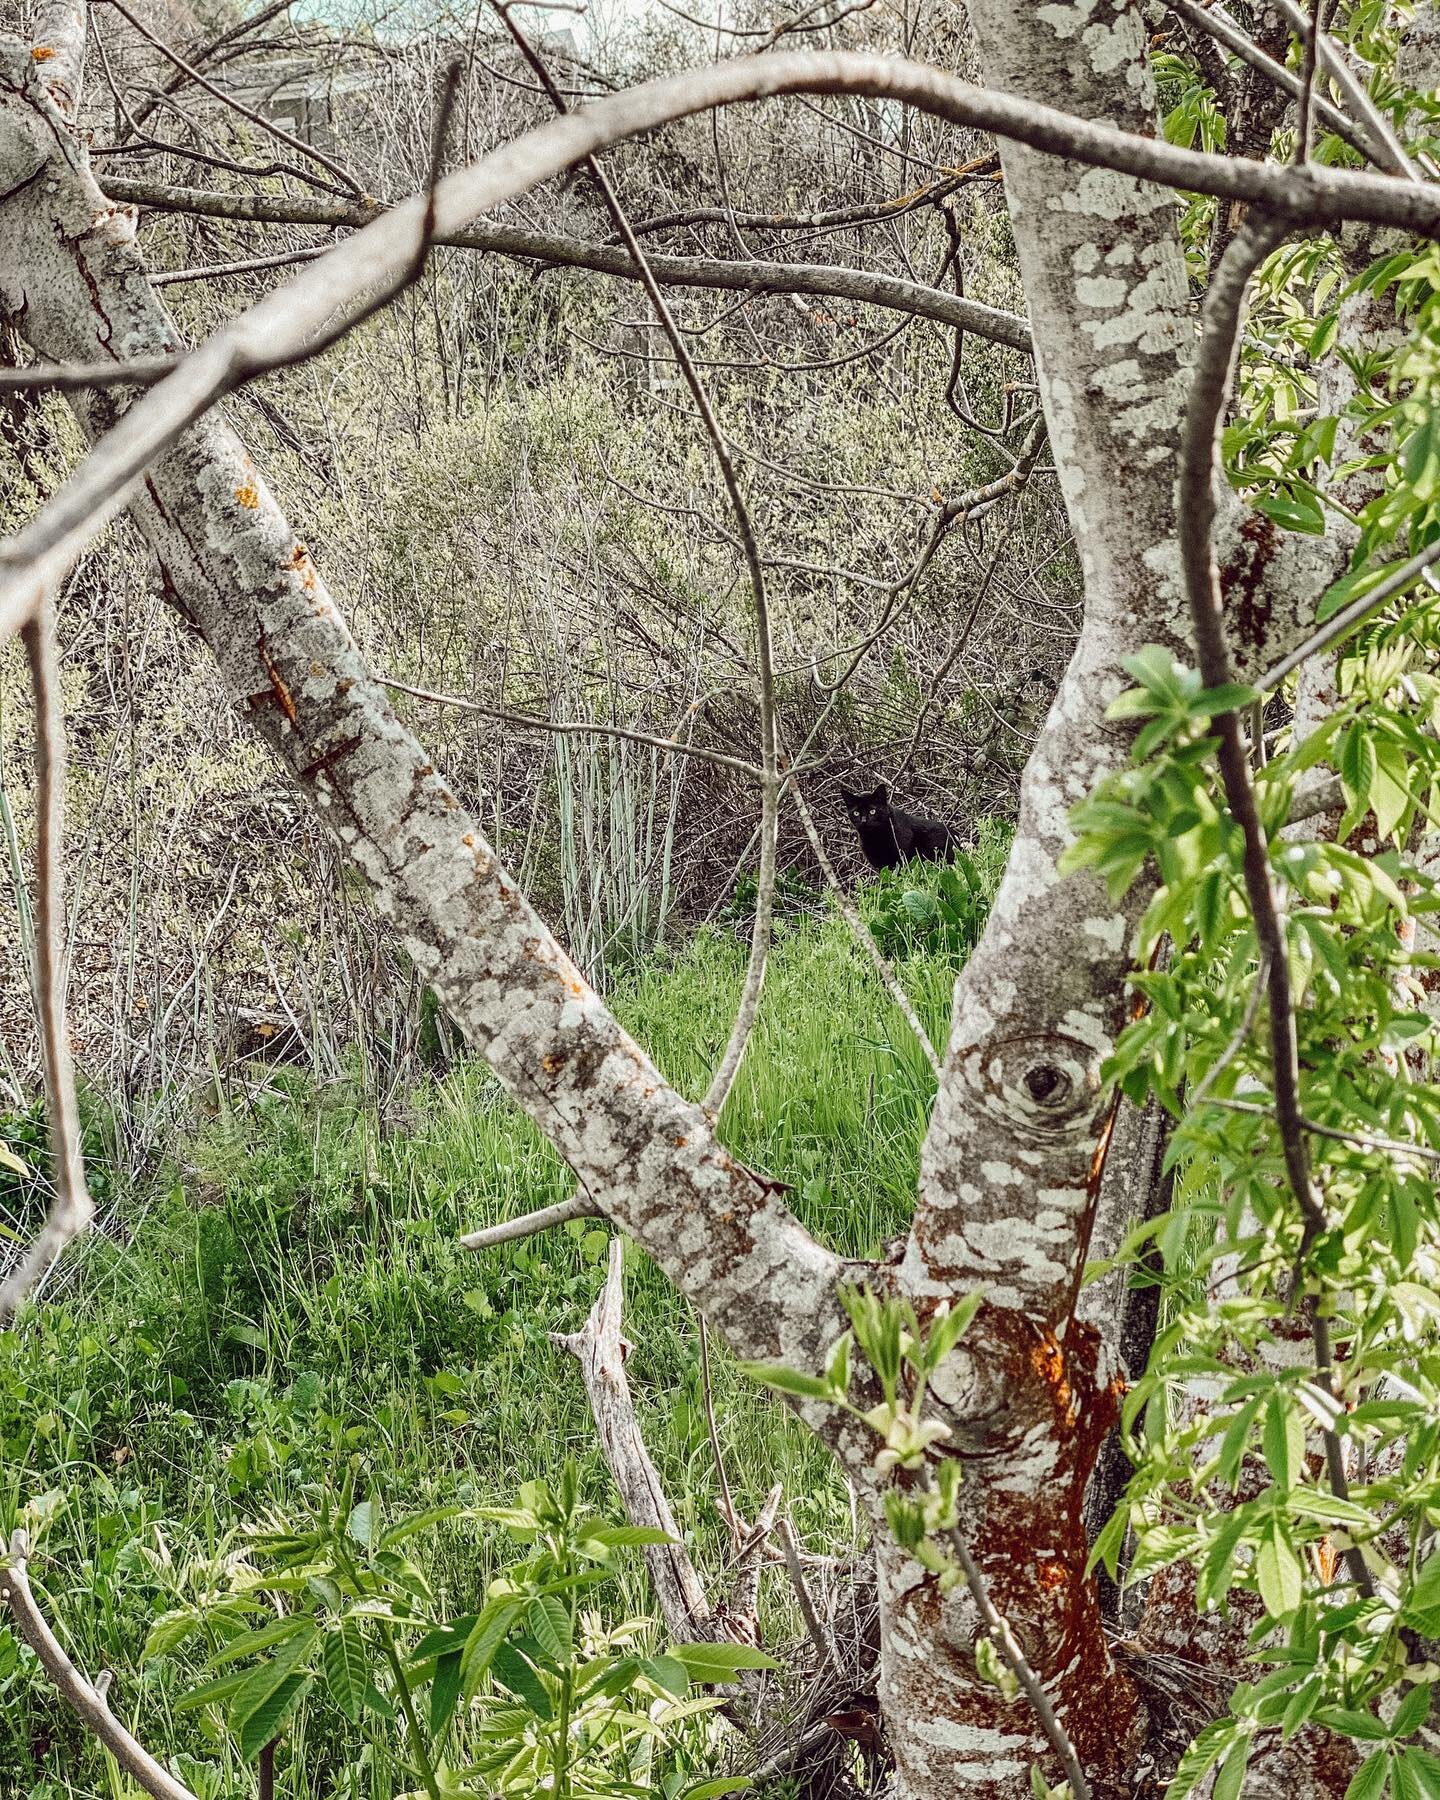 Can you spot the kitty in this photo?😻

Spring is becoming my favorite season more and more. I love how it finally gets warmer, watching all the green return, seeing the flowers bloom, and animals and birds come back to play. It&rsquo;s such a hopef